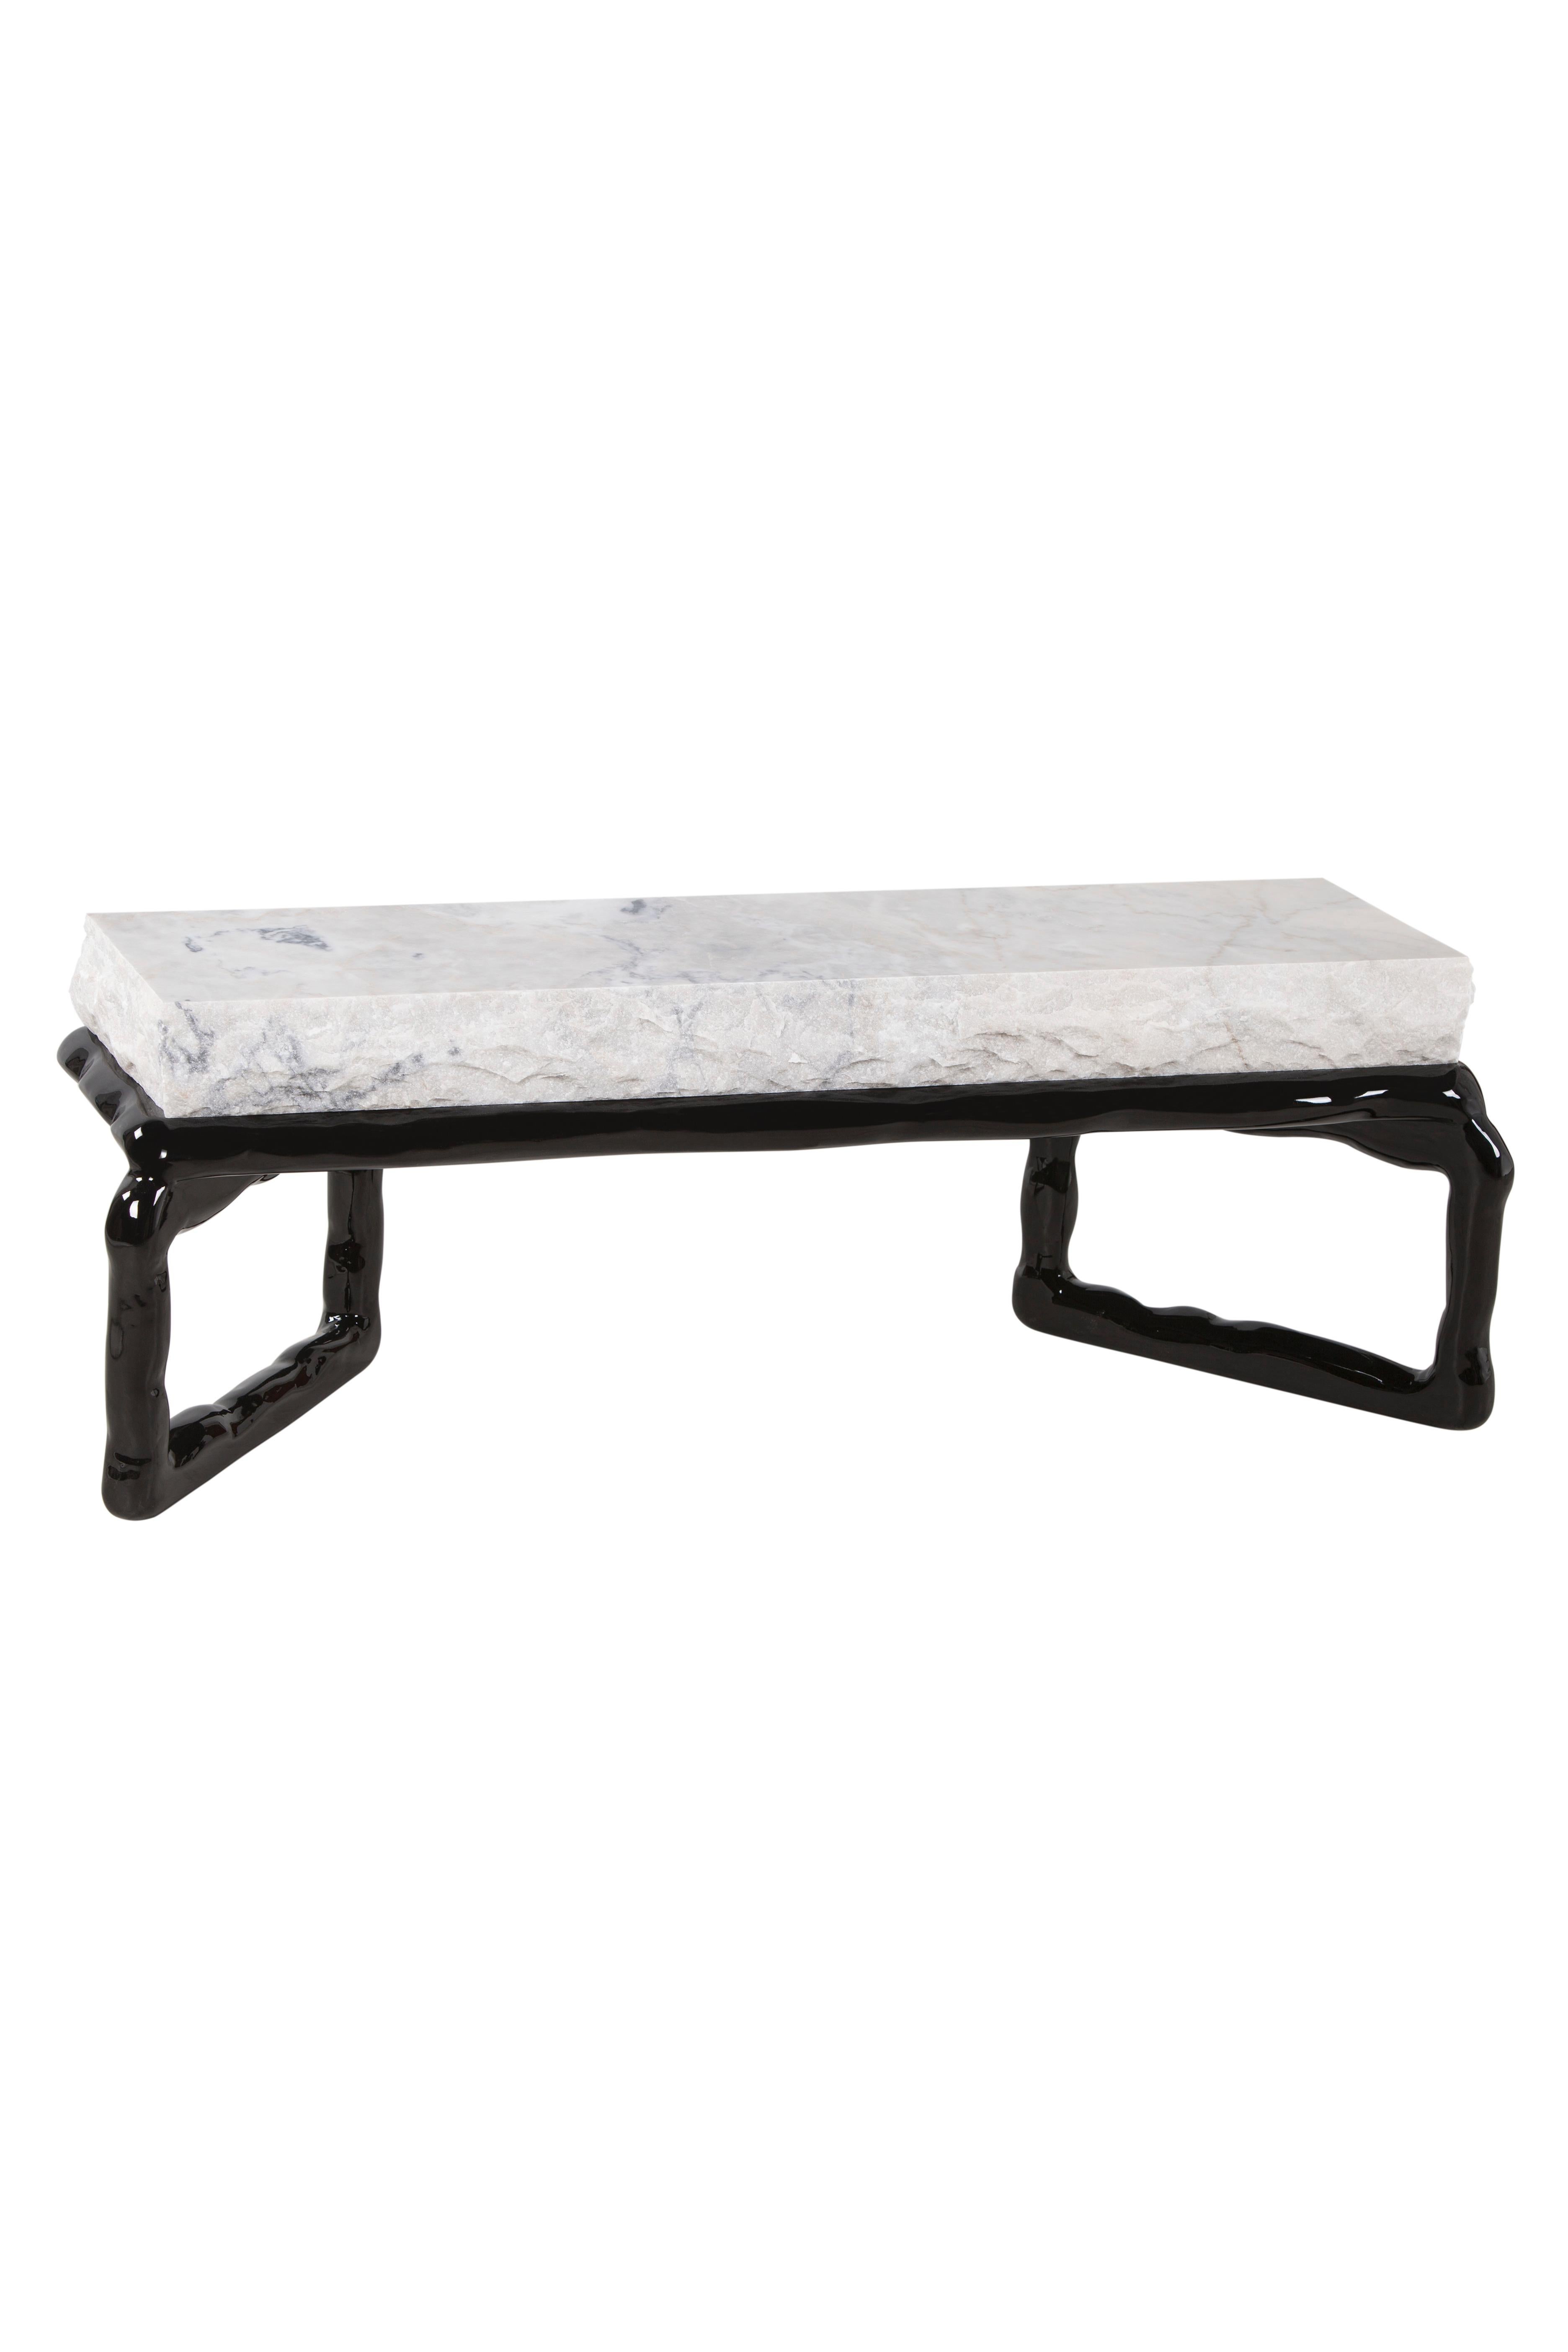 Calacatta Cremo marble coffee table by Green Apple
Dimensions: H 45 x W 135 x D 50 cm
Materials: Black lacquer; high-gloss finish
Calacatta Cremo marble; matt

Wooden coffee table with top in matt Calacatta Cremo marble. Base lacquered in